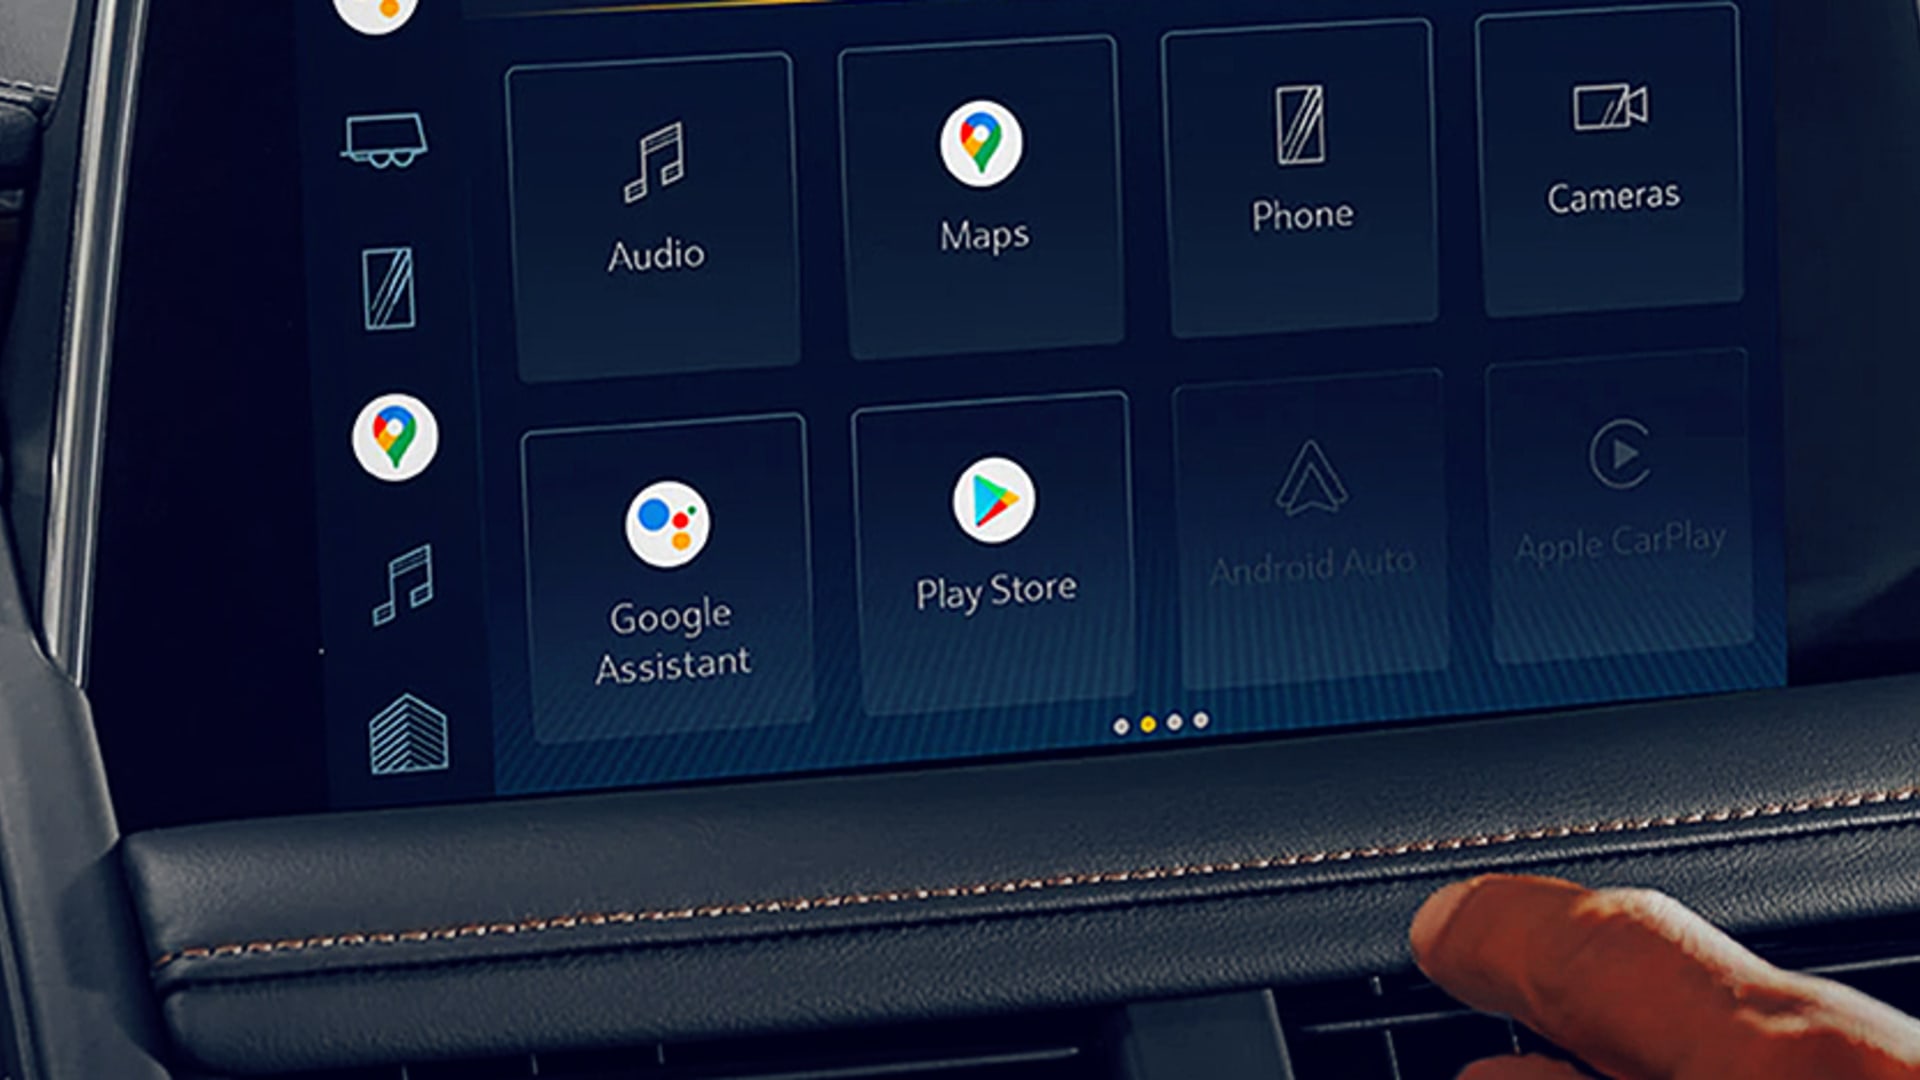 ENHANCE YOUR IN-VEHICLE EXPERIENCE WITH GOOGLE BUILT-IN*